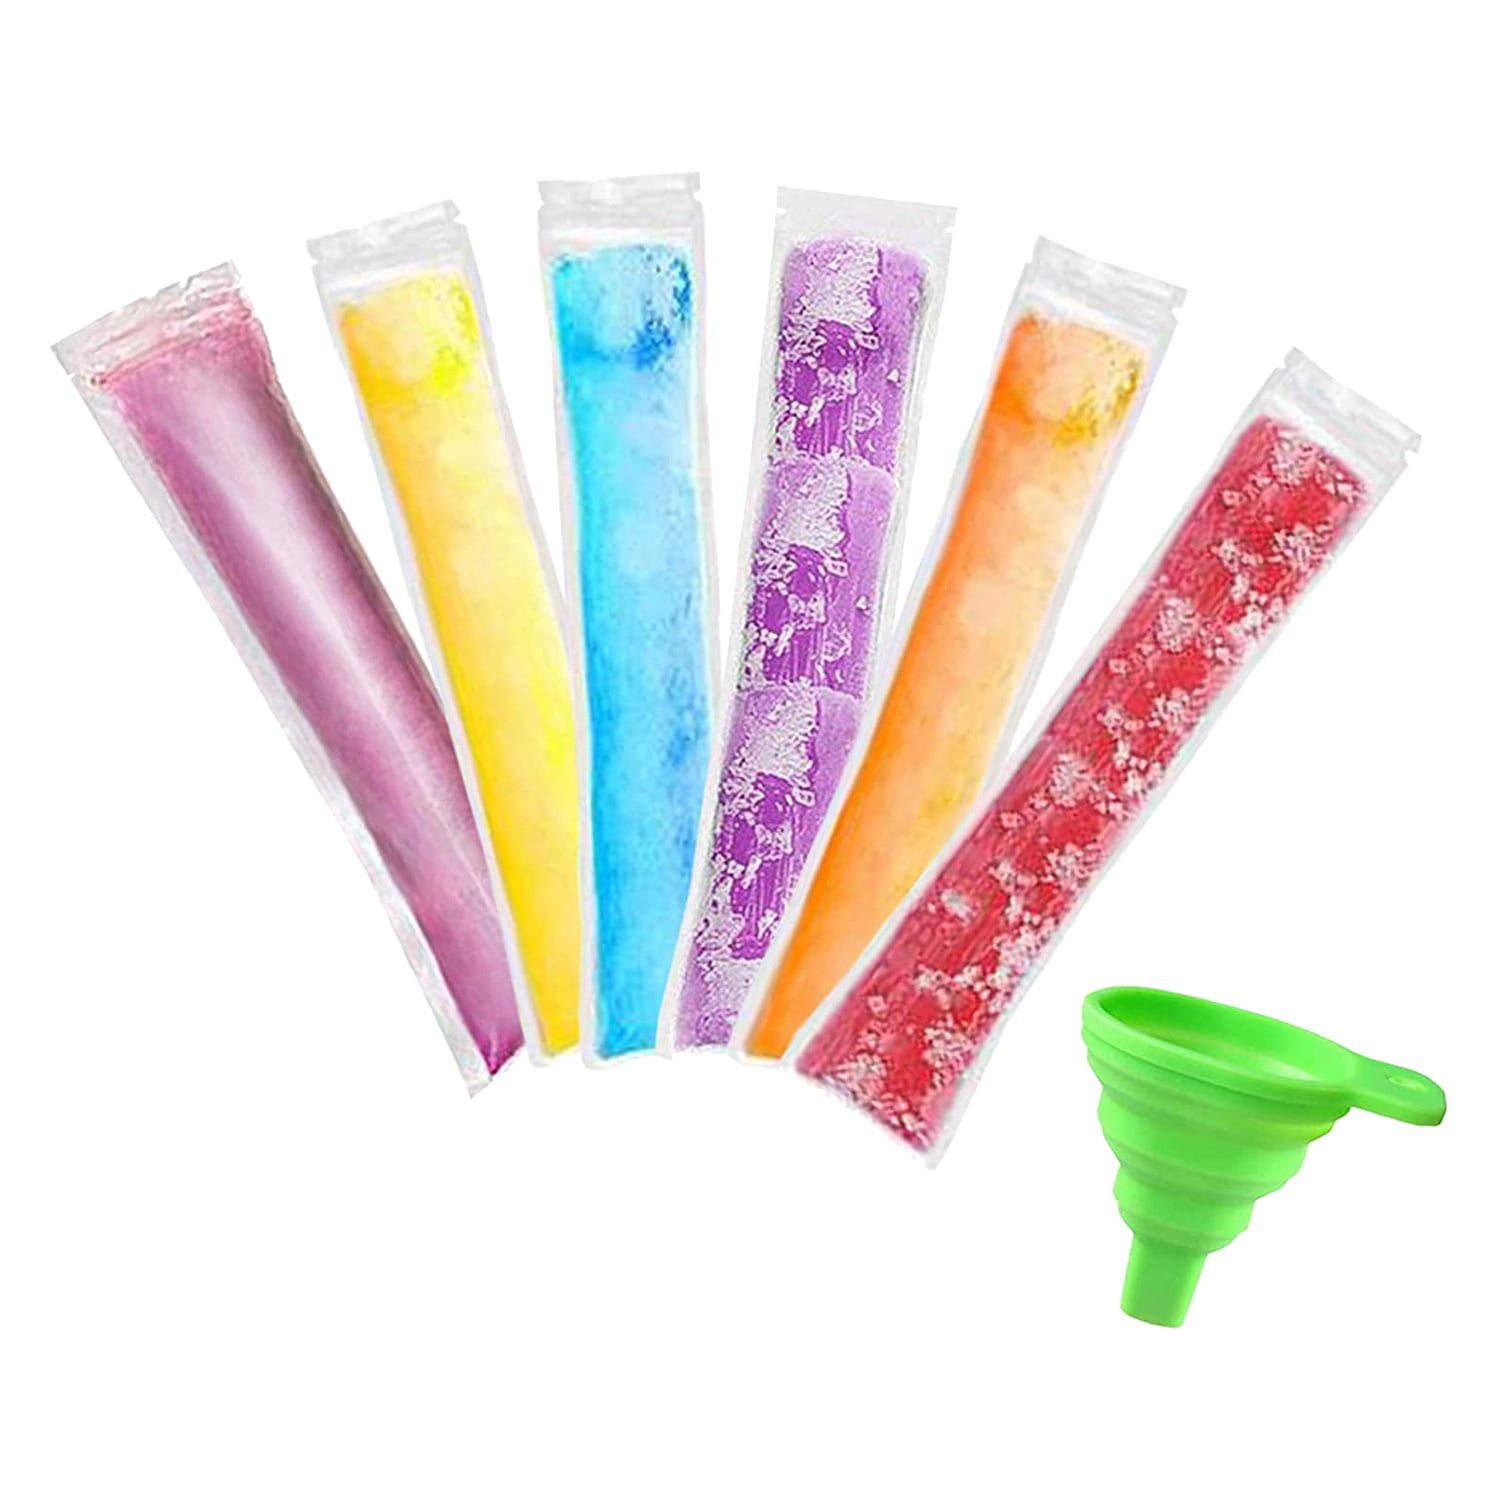 160PCS Disposable Popsicle Mold Bags Free Zip Ice Pop Freeze Candy Maker Pouch